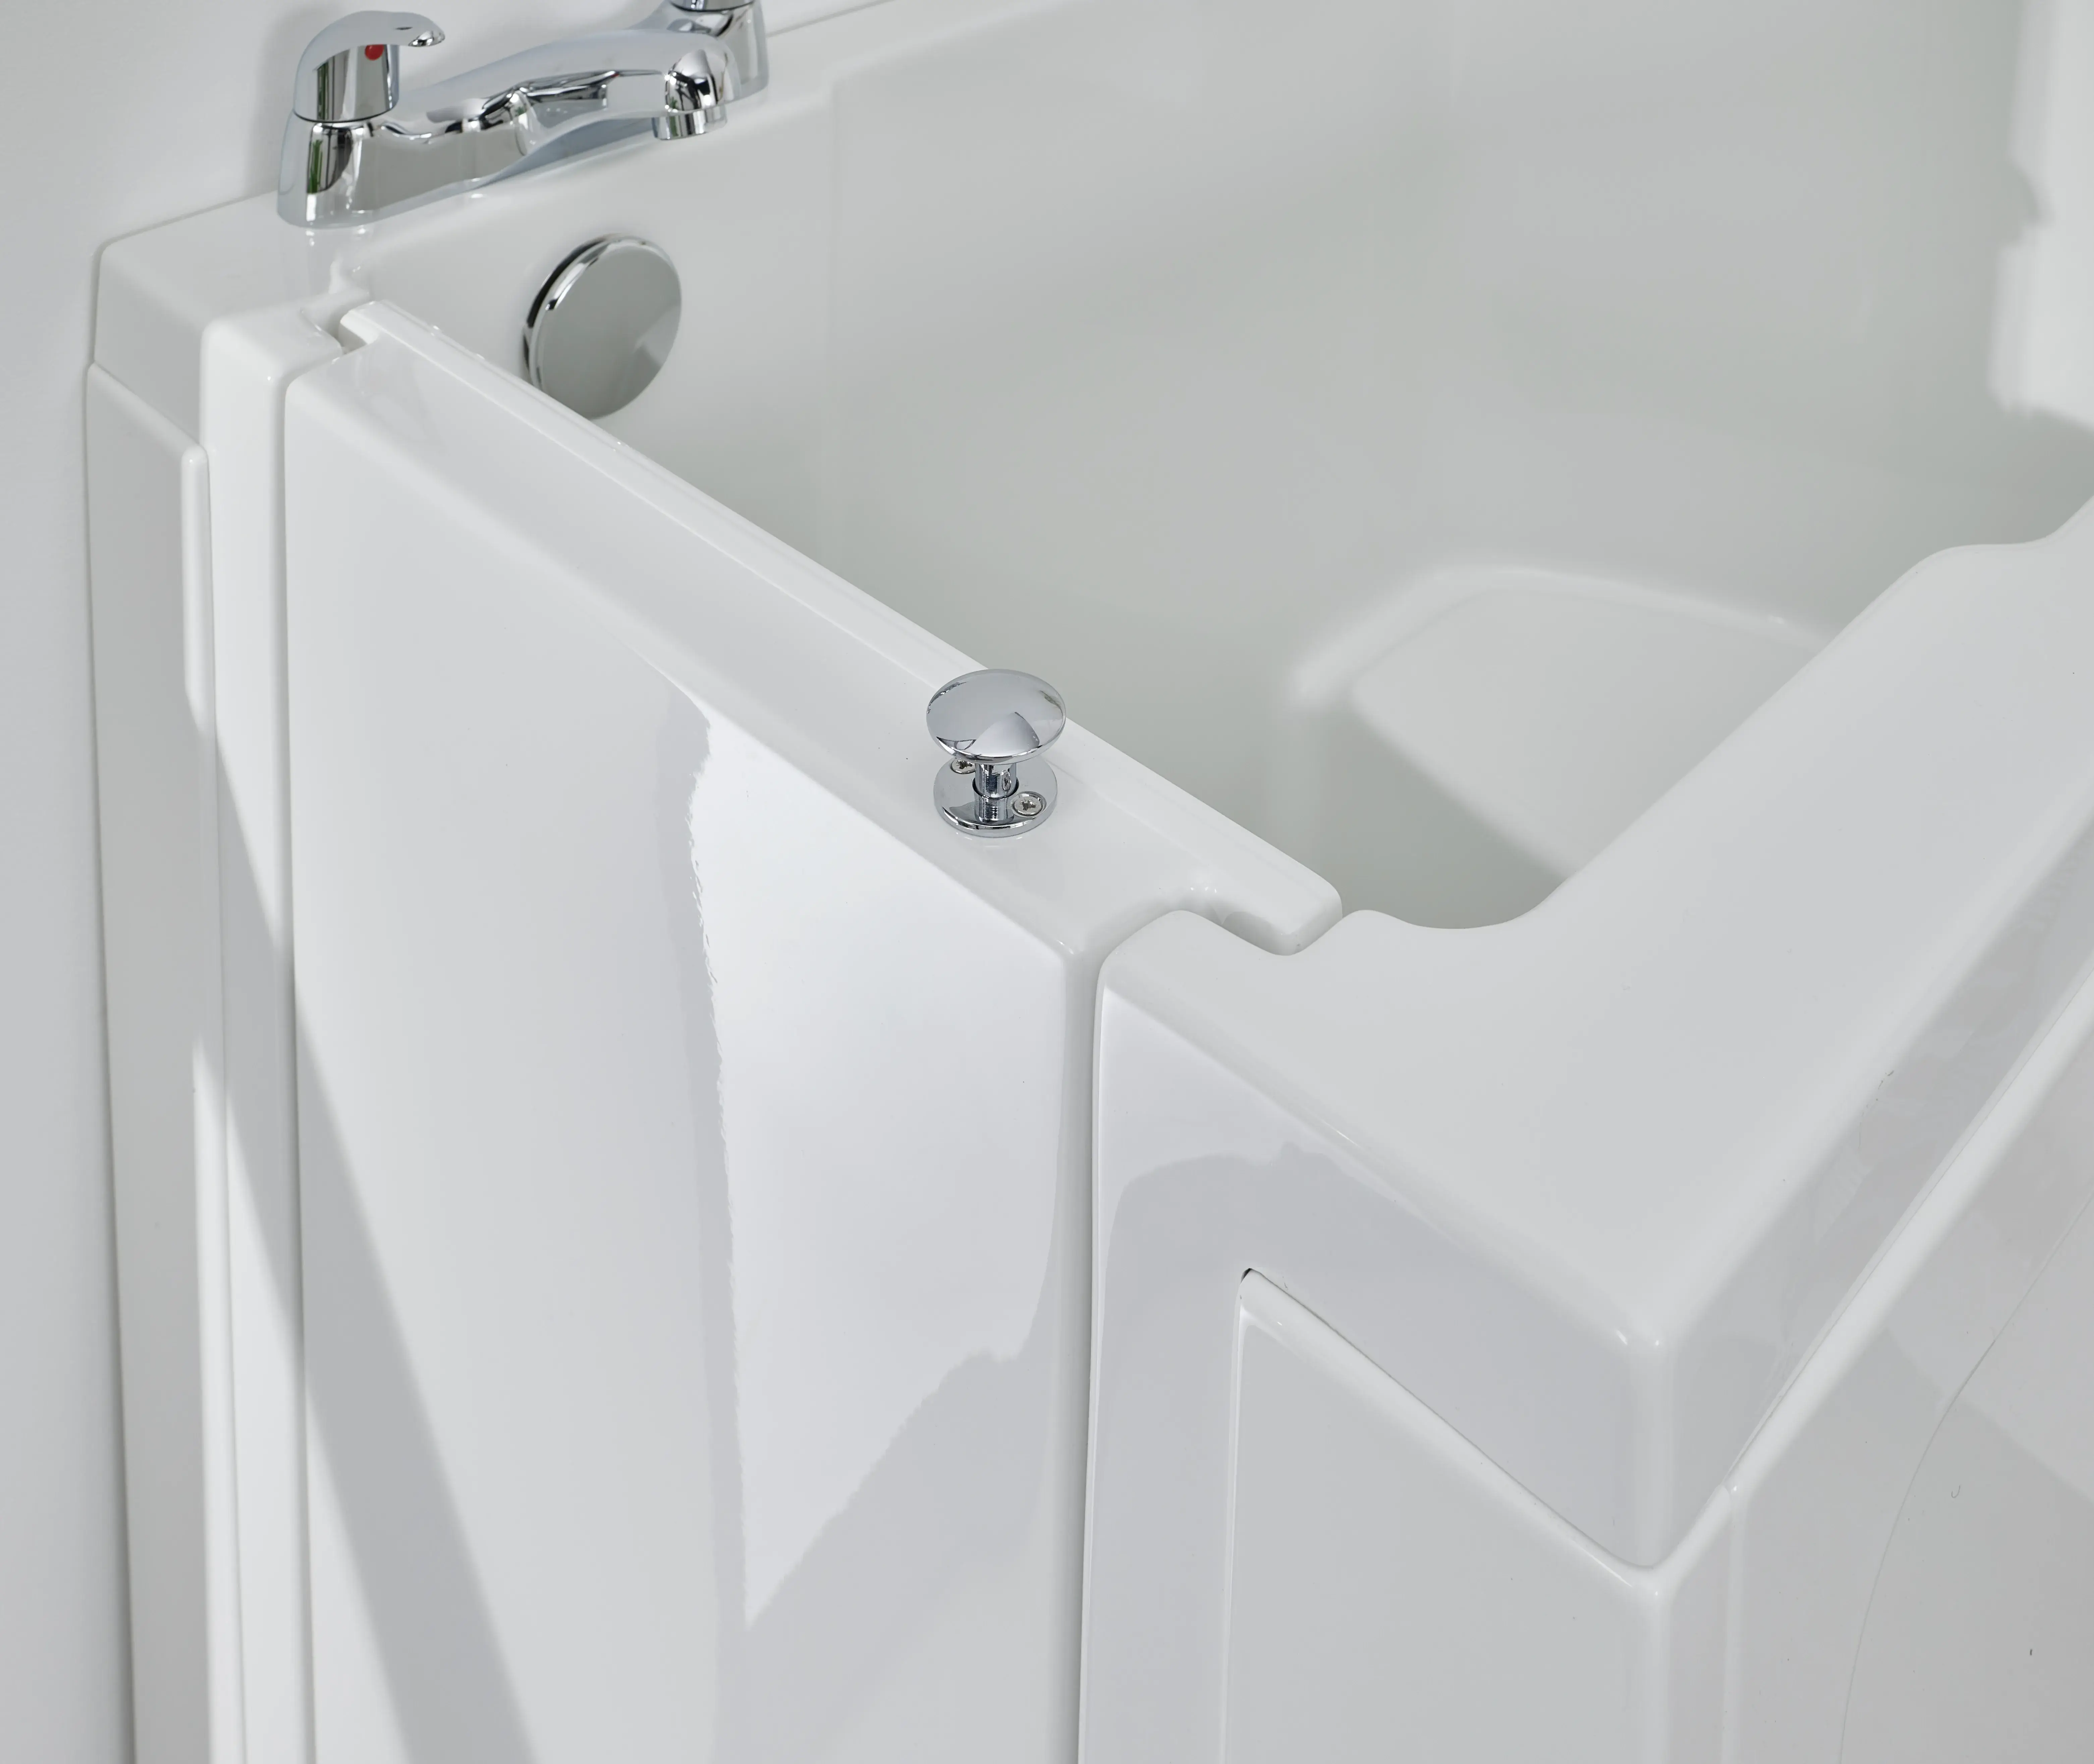 A white bath tub with a shower head and arm spout.